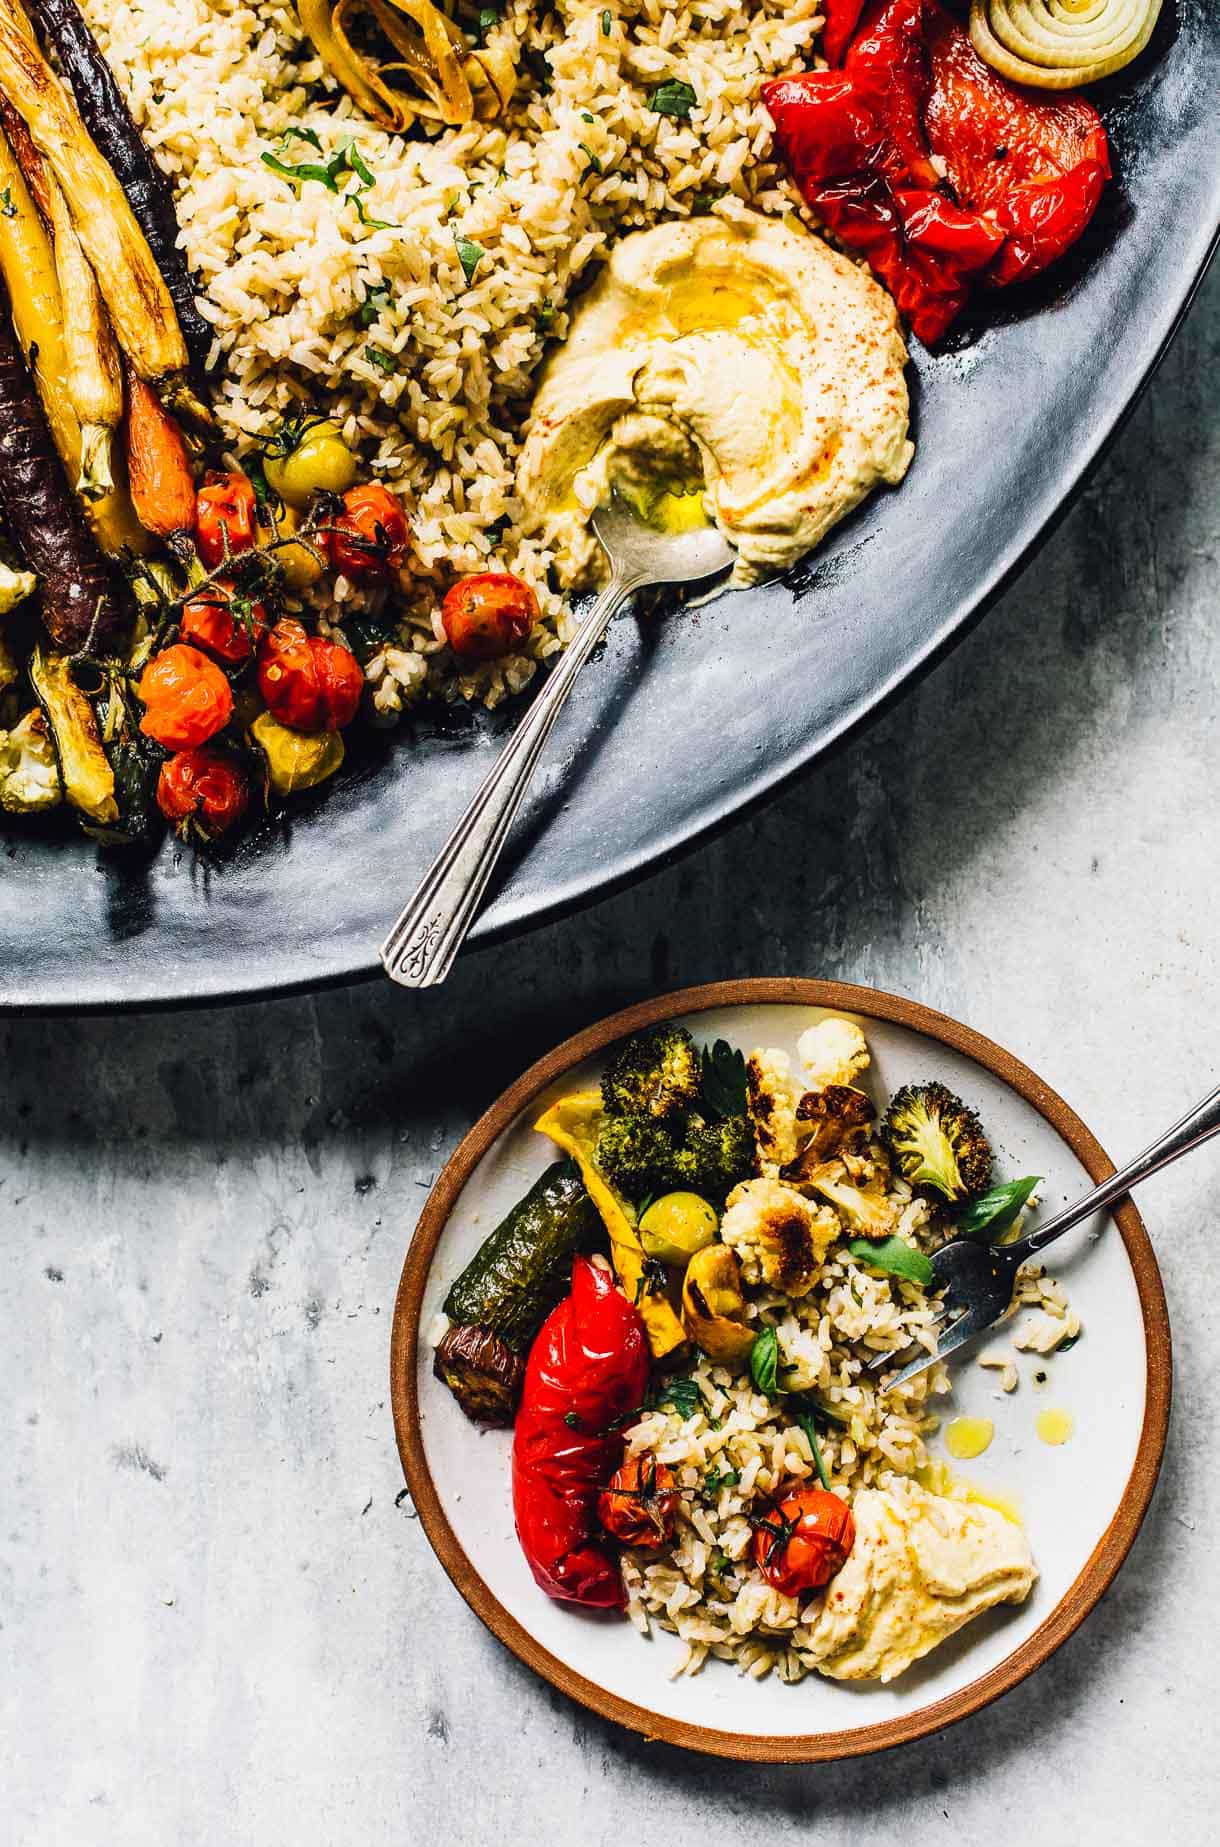 Hummus Platter with Roasted Vegetables and Rice